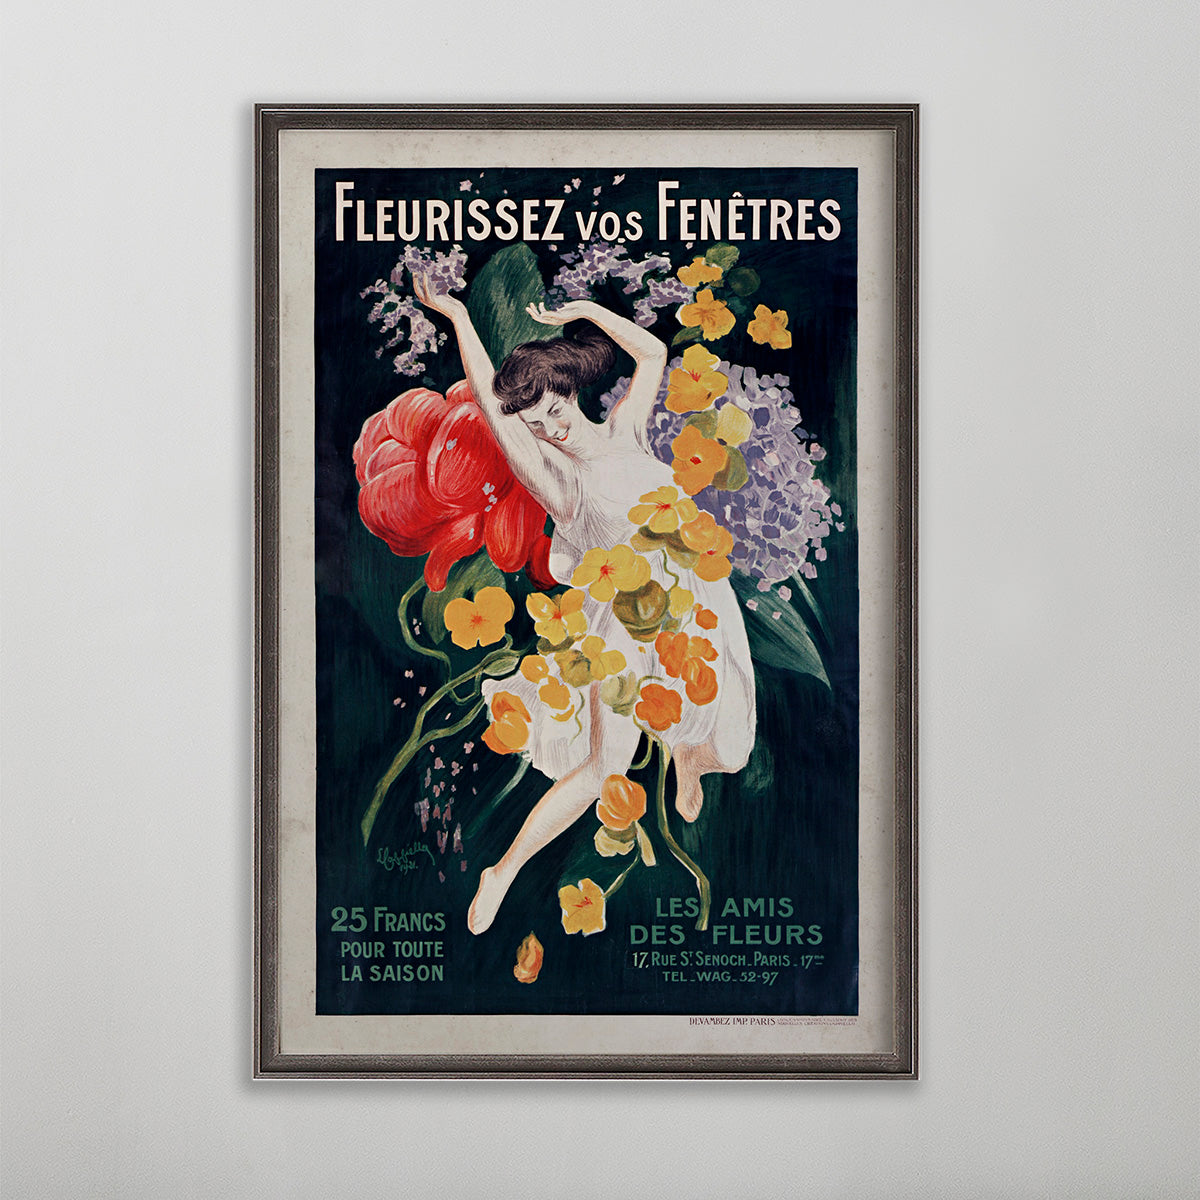 Fleurissez Vos Fenetres vintage poster wall art by leonetto cappiello. Woman surrounding by flowers.